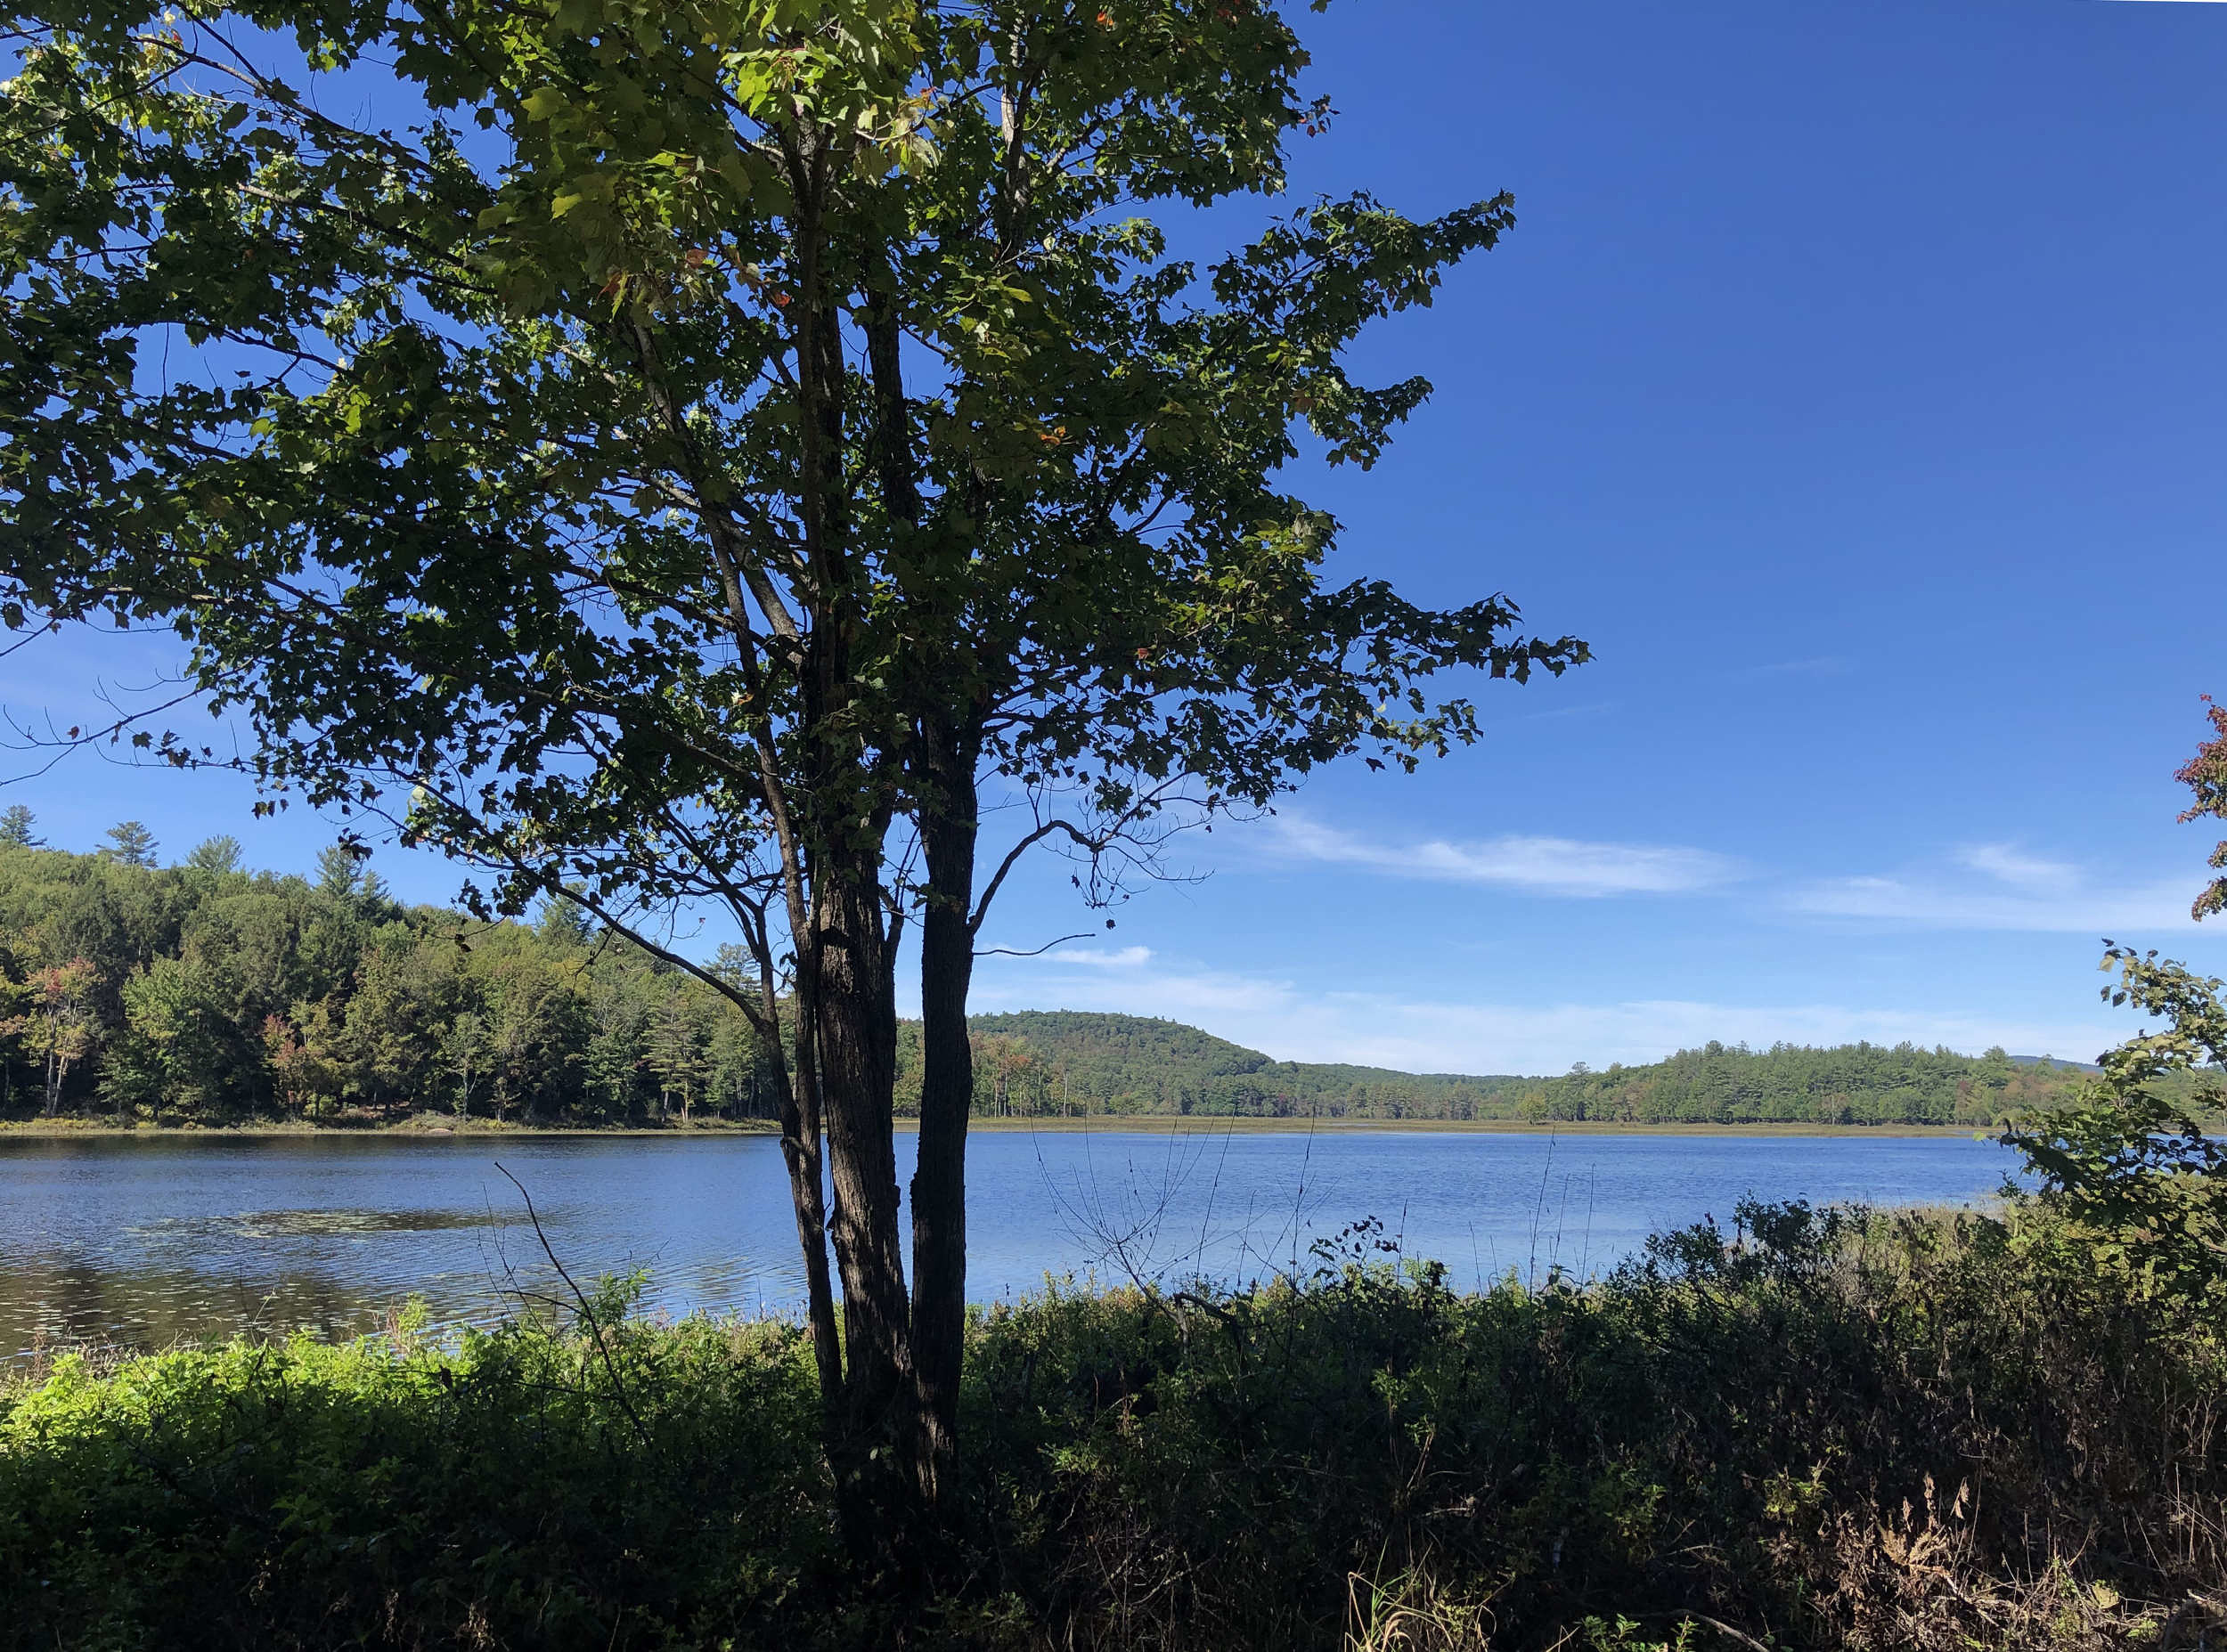 A view of MacDowell Lake, with a tree in foreground. (photo © Brett Amy Thelen)